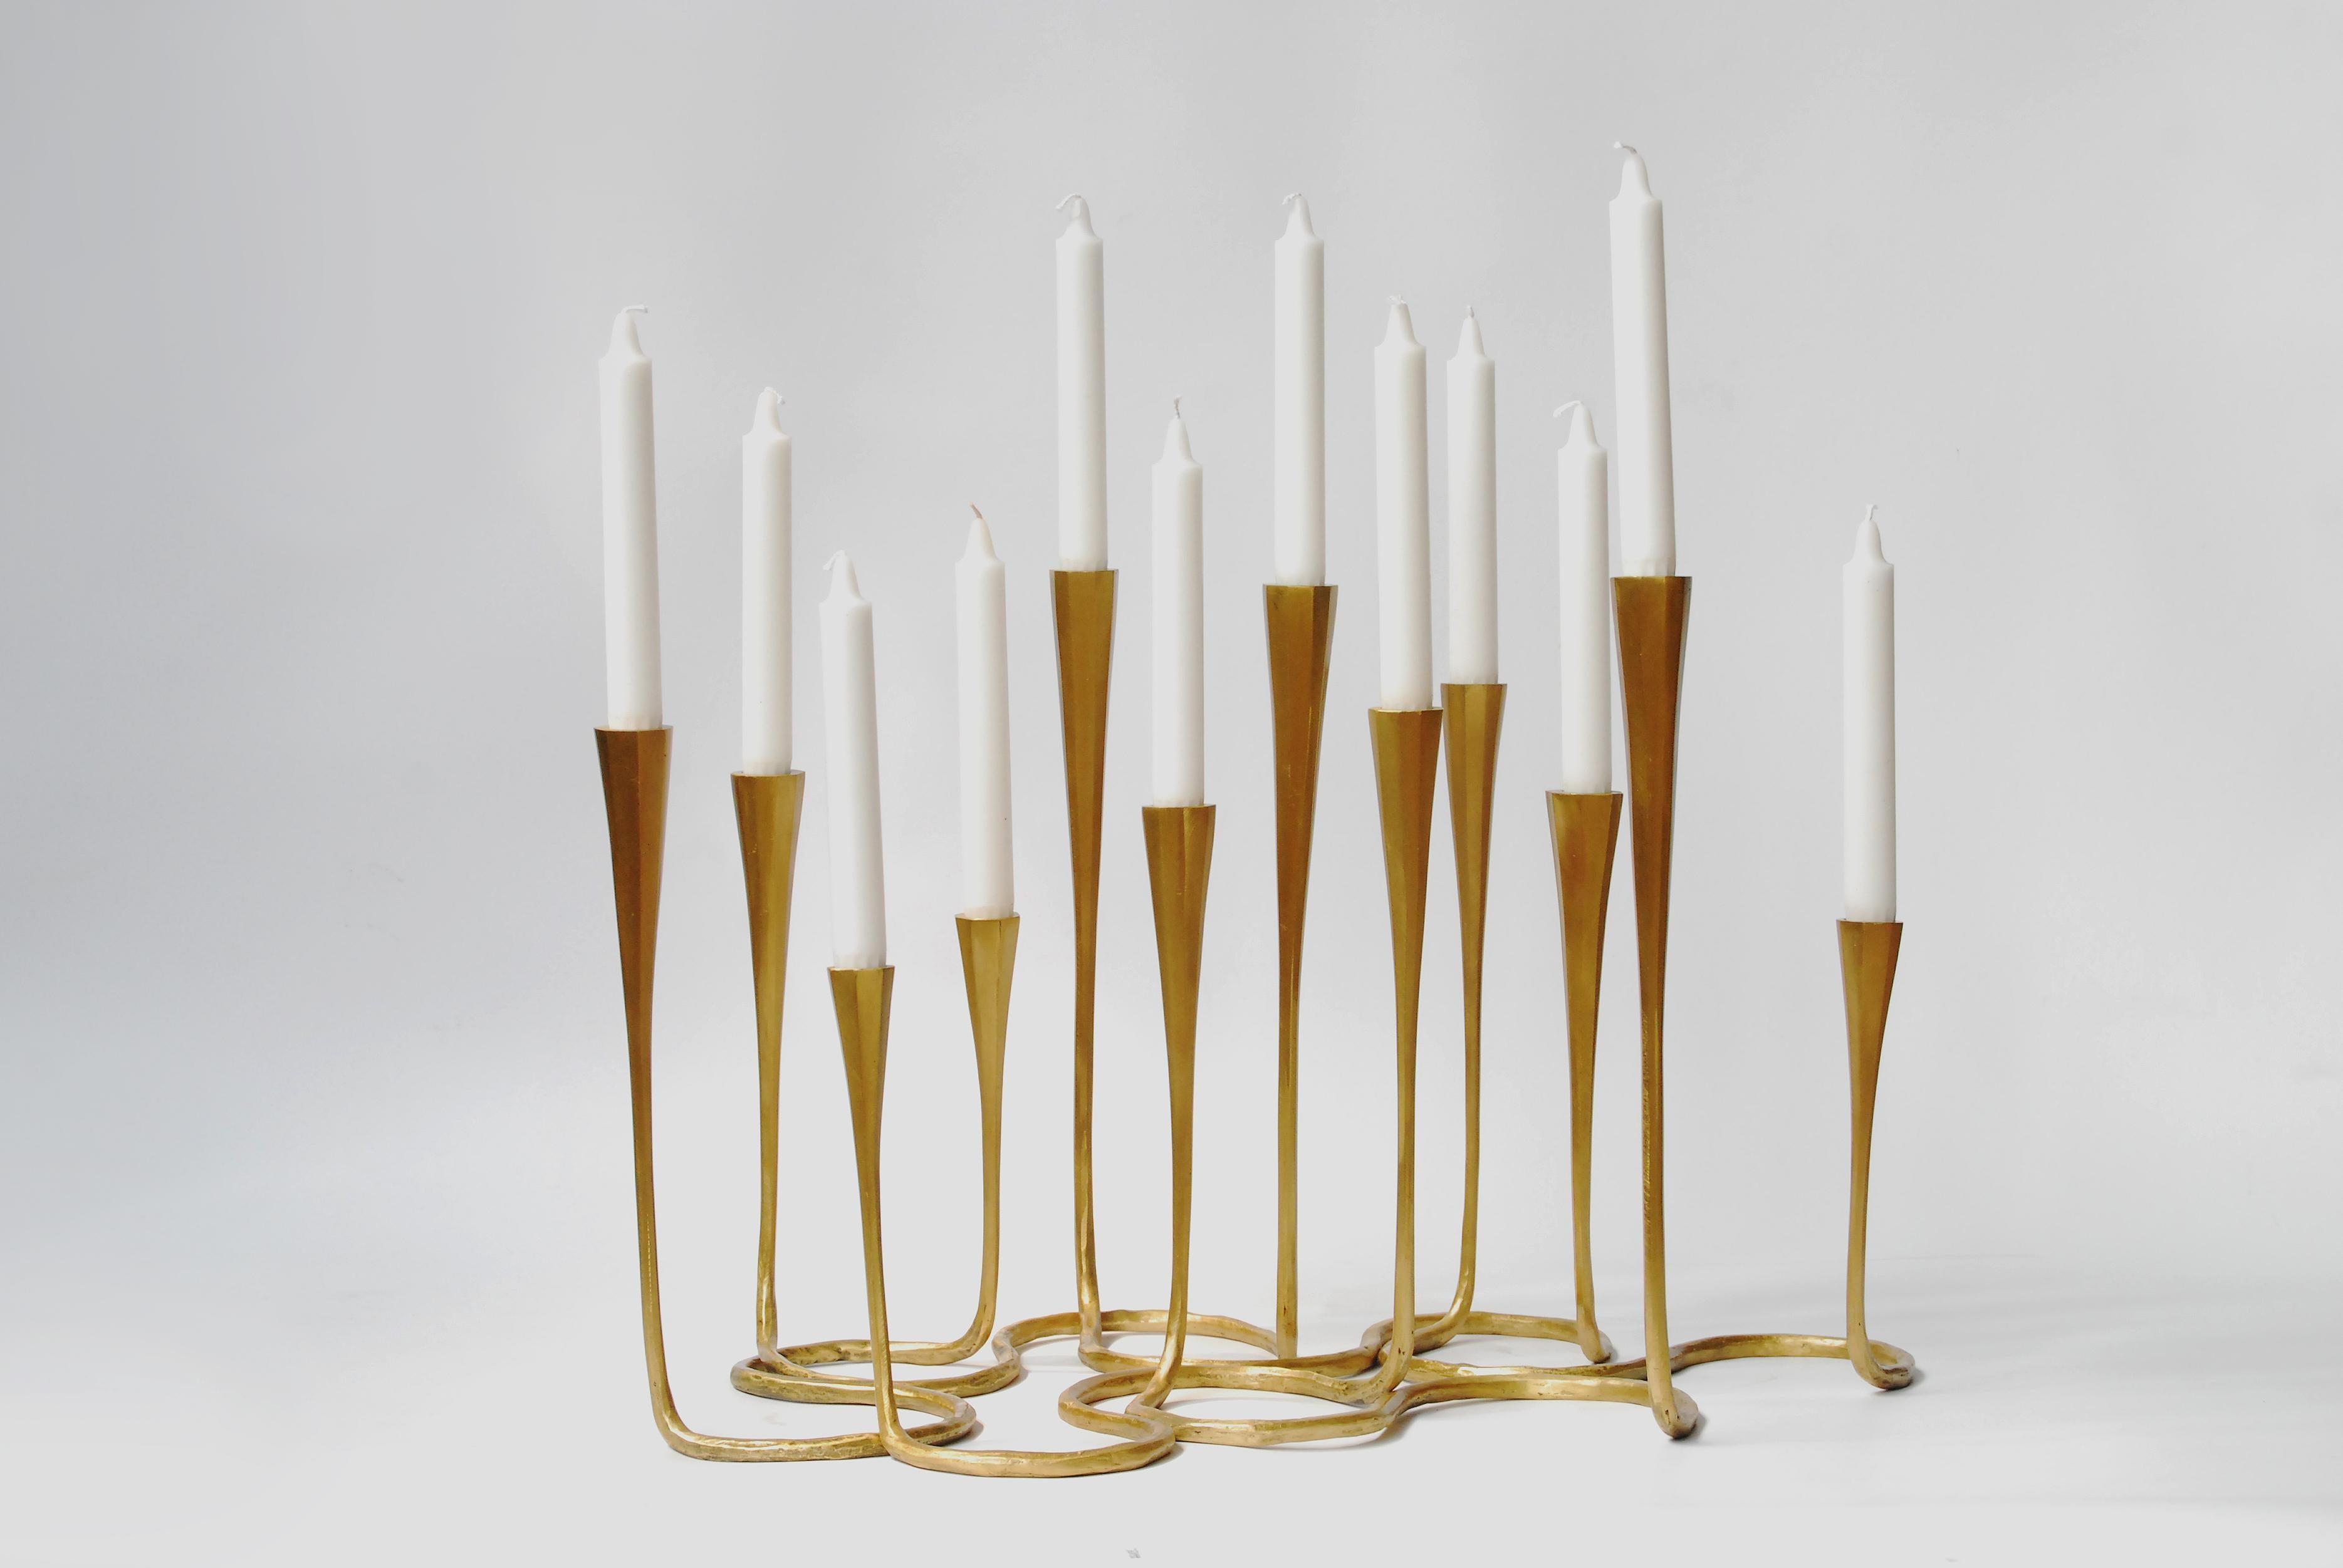 AVAILABLE NOW AND READY TO SHIP! 

Gold bronze daisy candlestands are cast using the lost wax method. Each daisy comes as a set of two candlestands joined at the base. Combine several to create a stunning candlelit display on tabletops. Available in